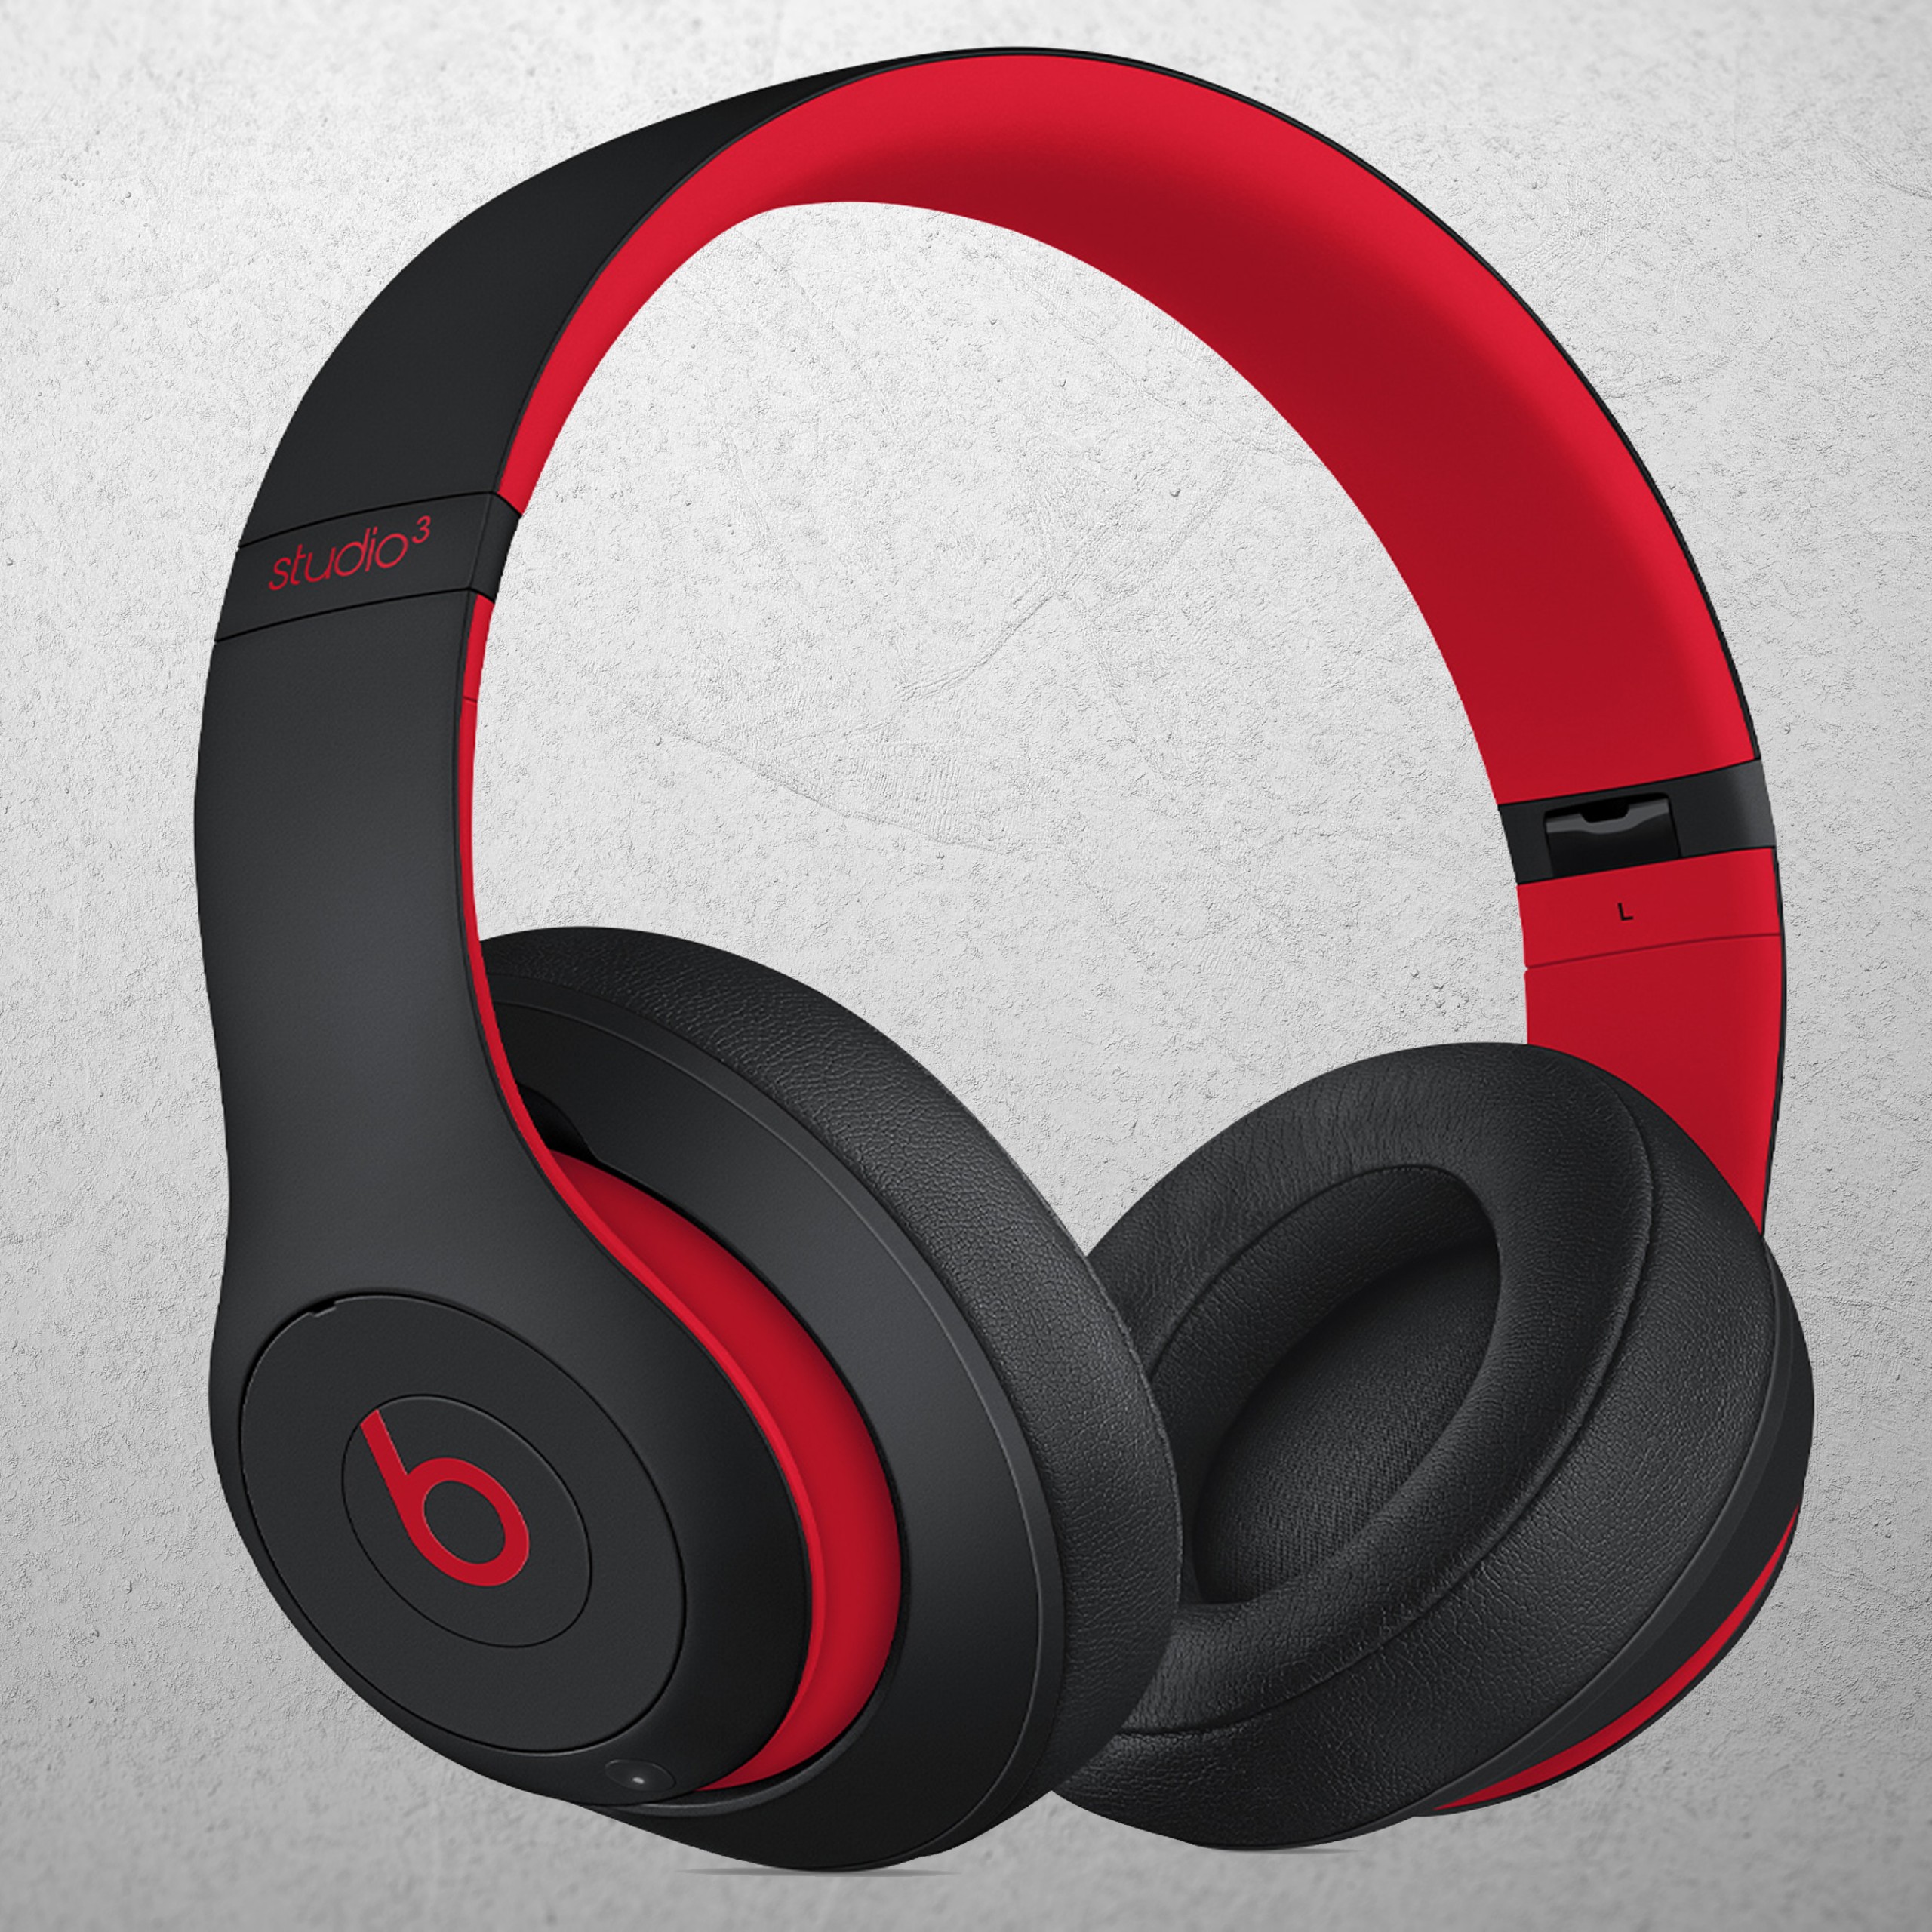 Experience the Beats Studio 3 wireless on-ear headphones by Beats By Dre, with repairable ear speaker, headphone jack, charging port, headband, hinge, and battery replacement services available at "One Hour Device Repair".